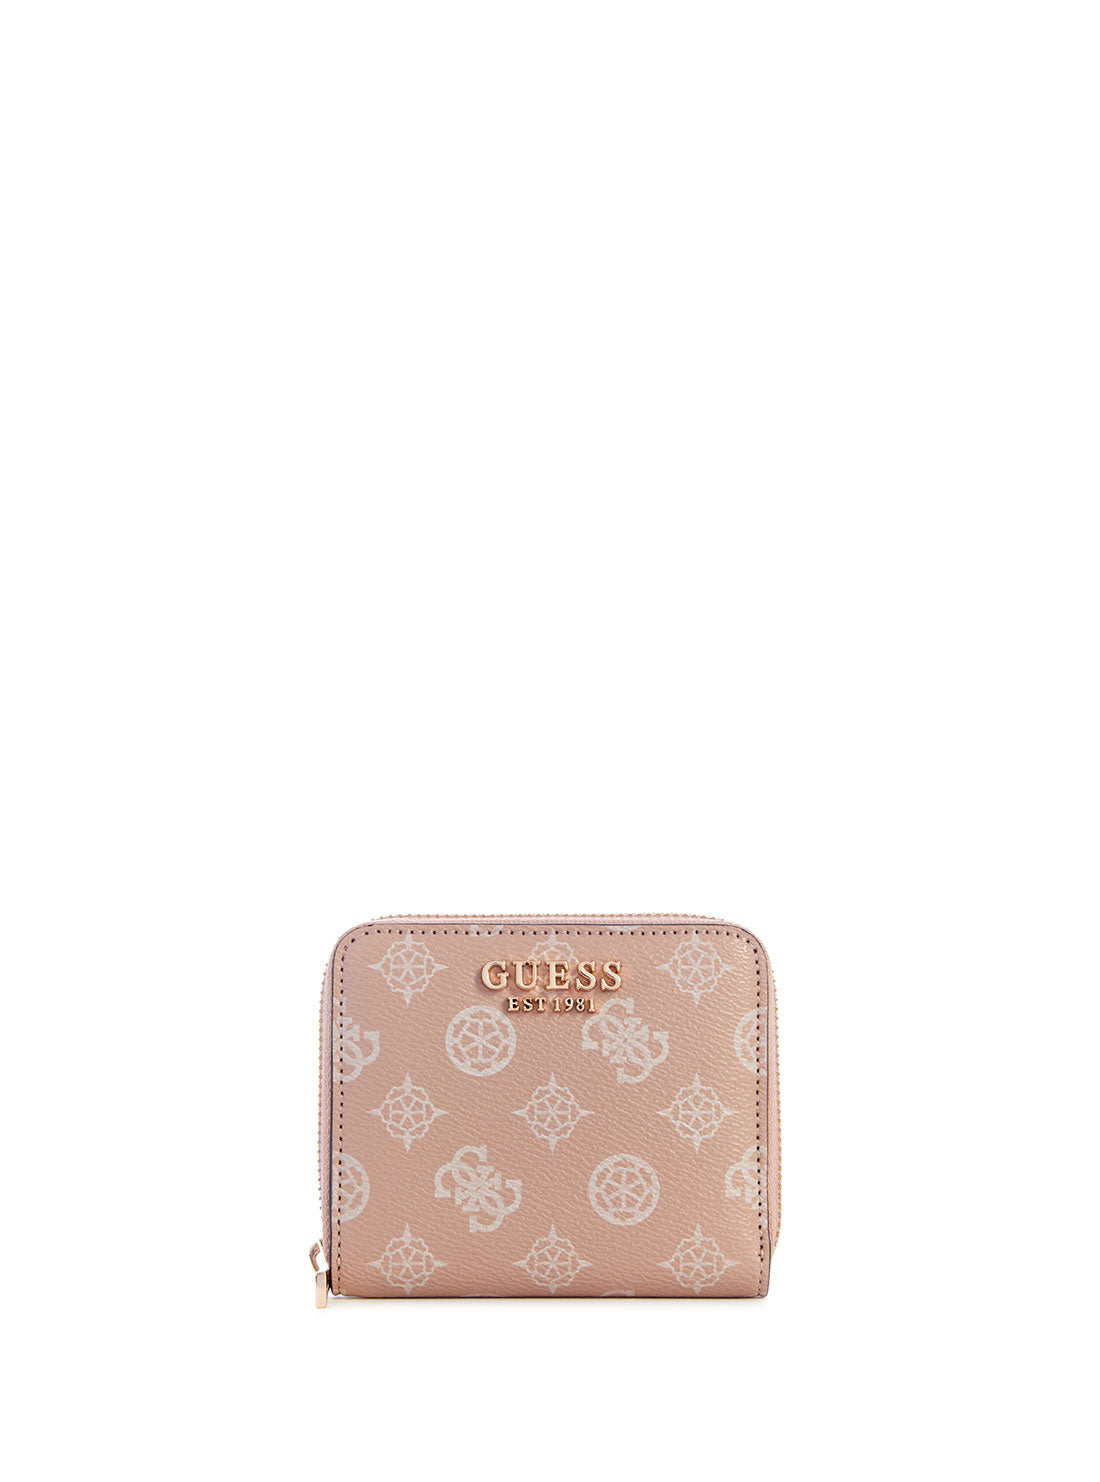 GUESS Women's Light Rose Logo Laurel Small Wallet PG850037 Front View